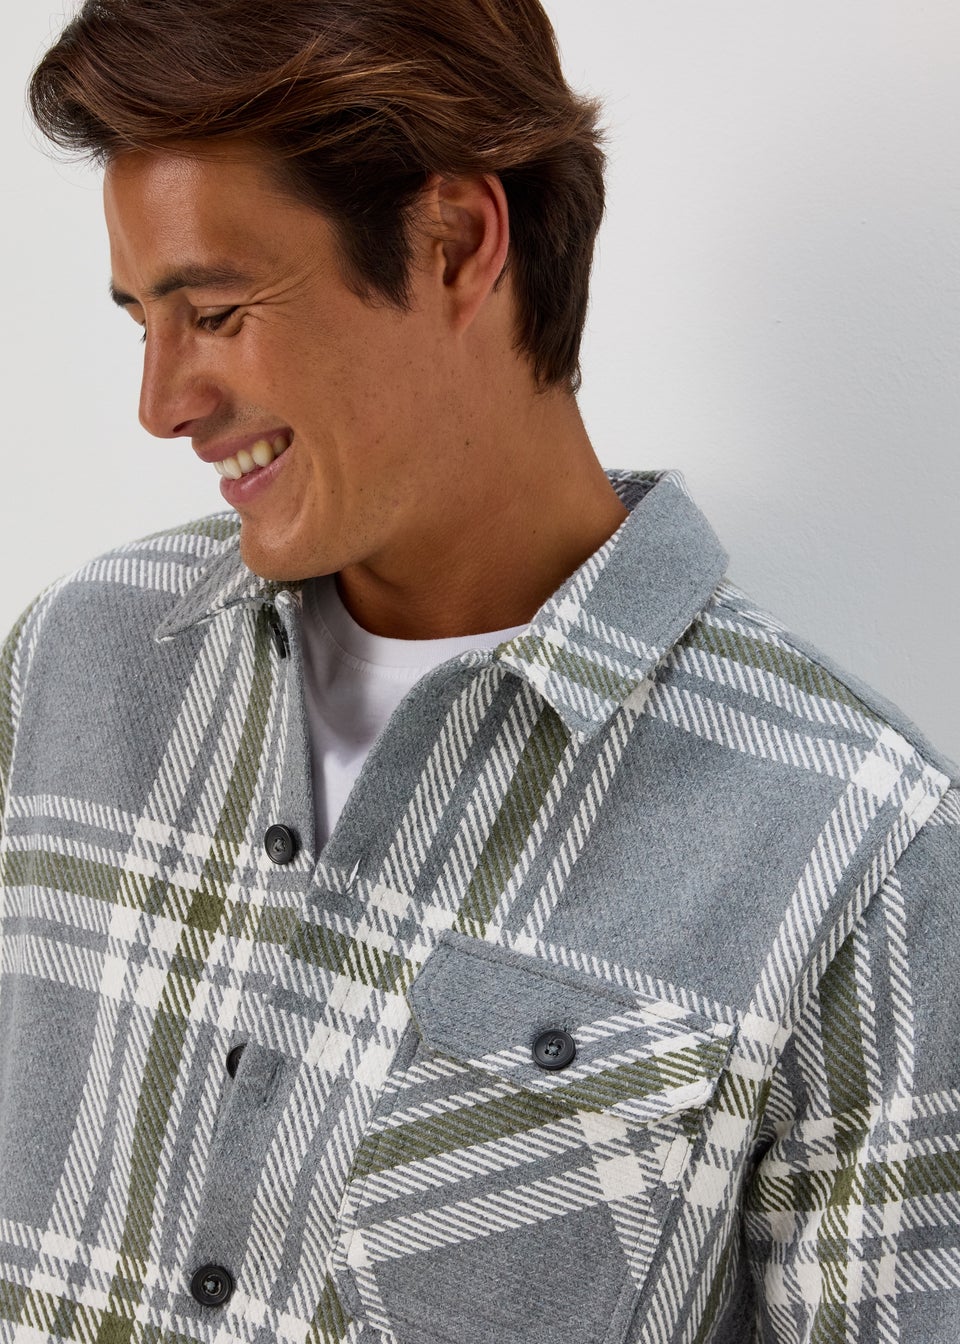 Grey Open Weave Check Over Shirt